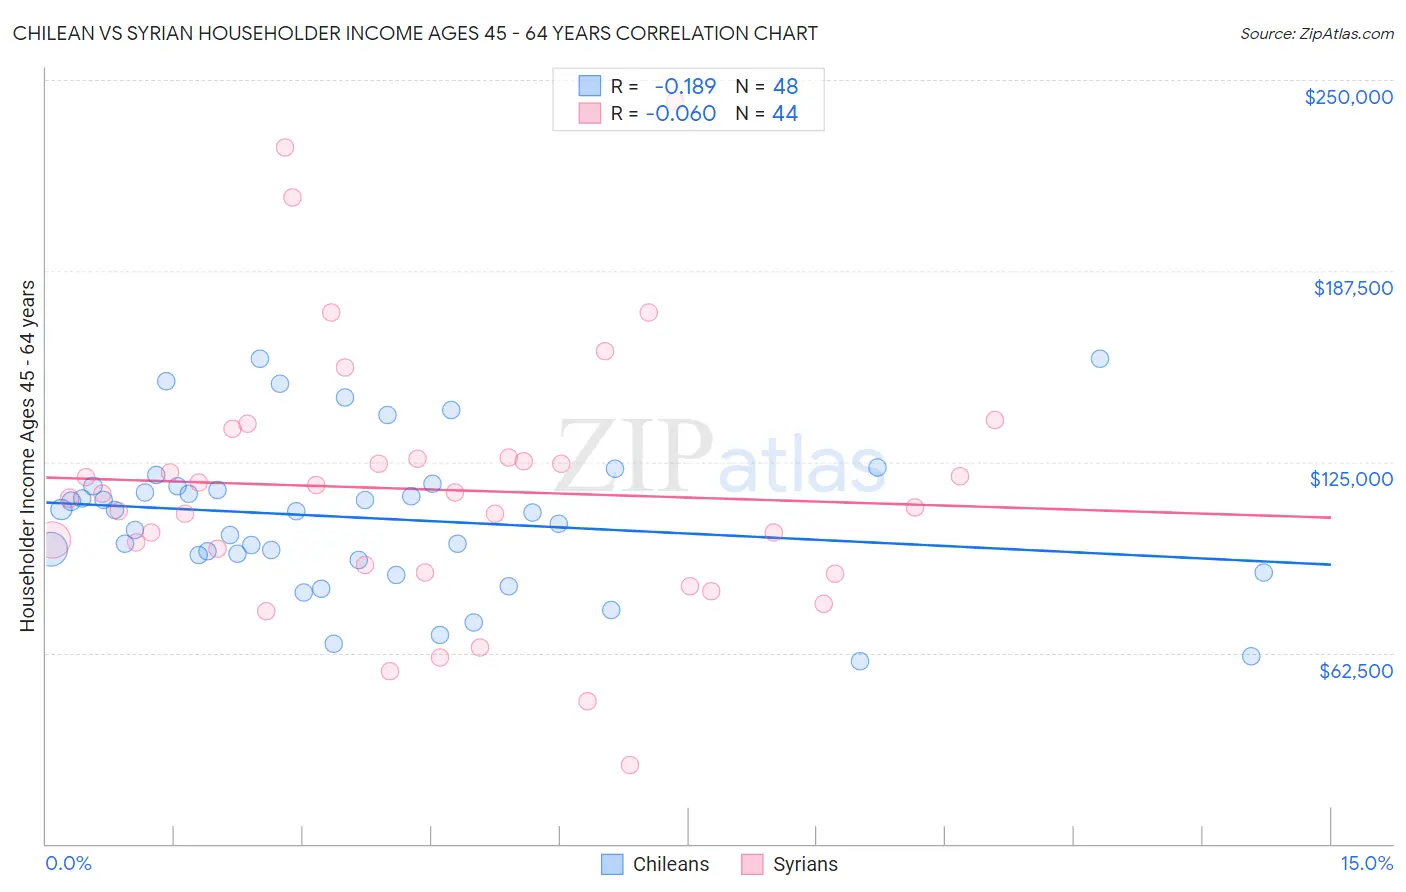 Chilean vs Syrian Householder Income Ages 45 - 64 years